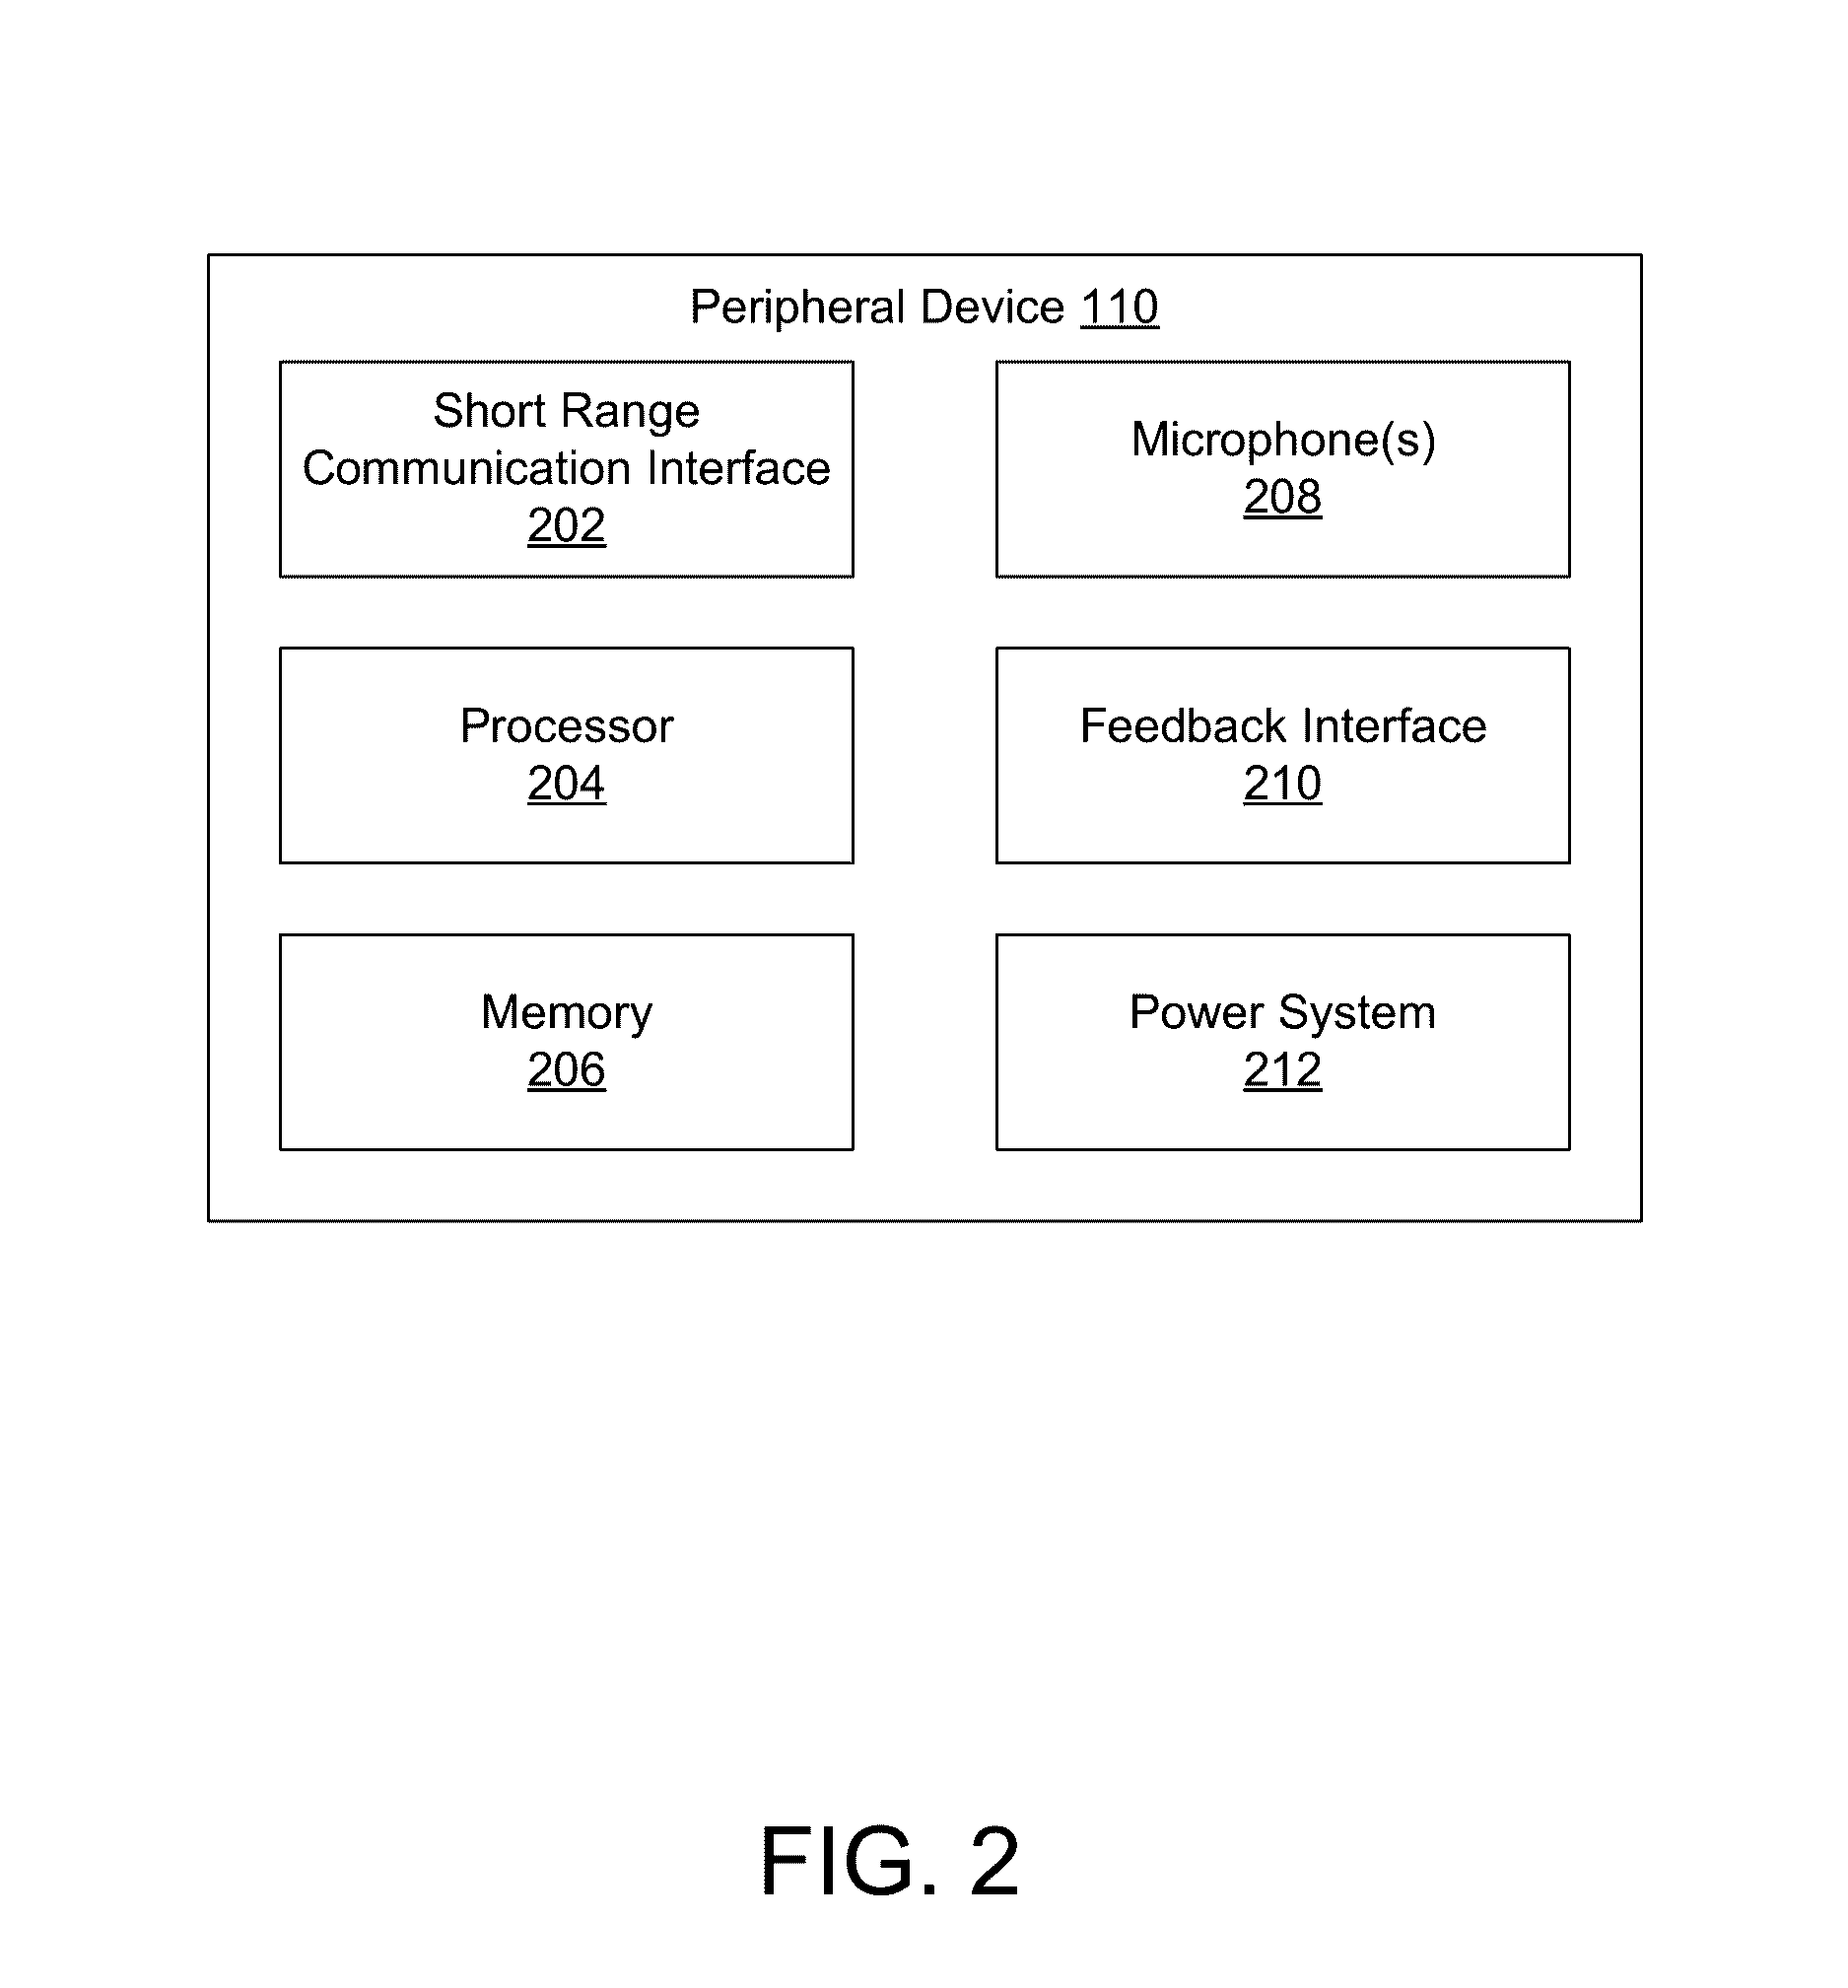 Camera Peripheral Device for Supplemental Audio Capture and Remote Control of Camera